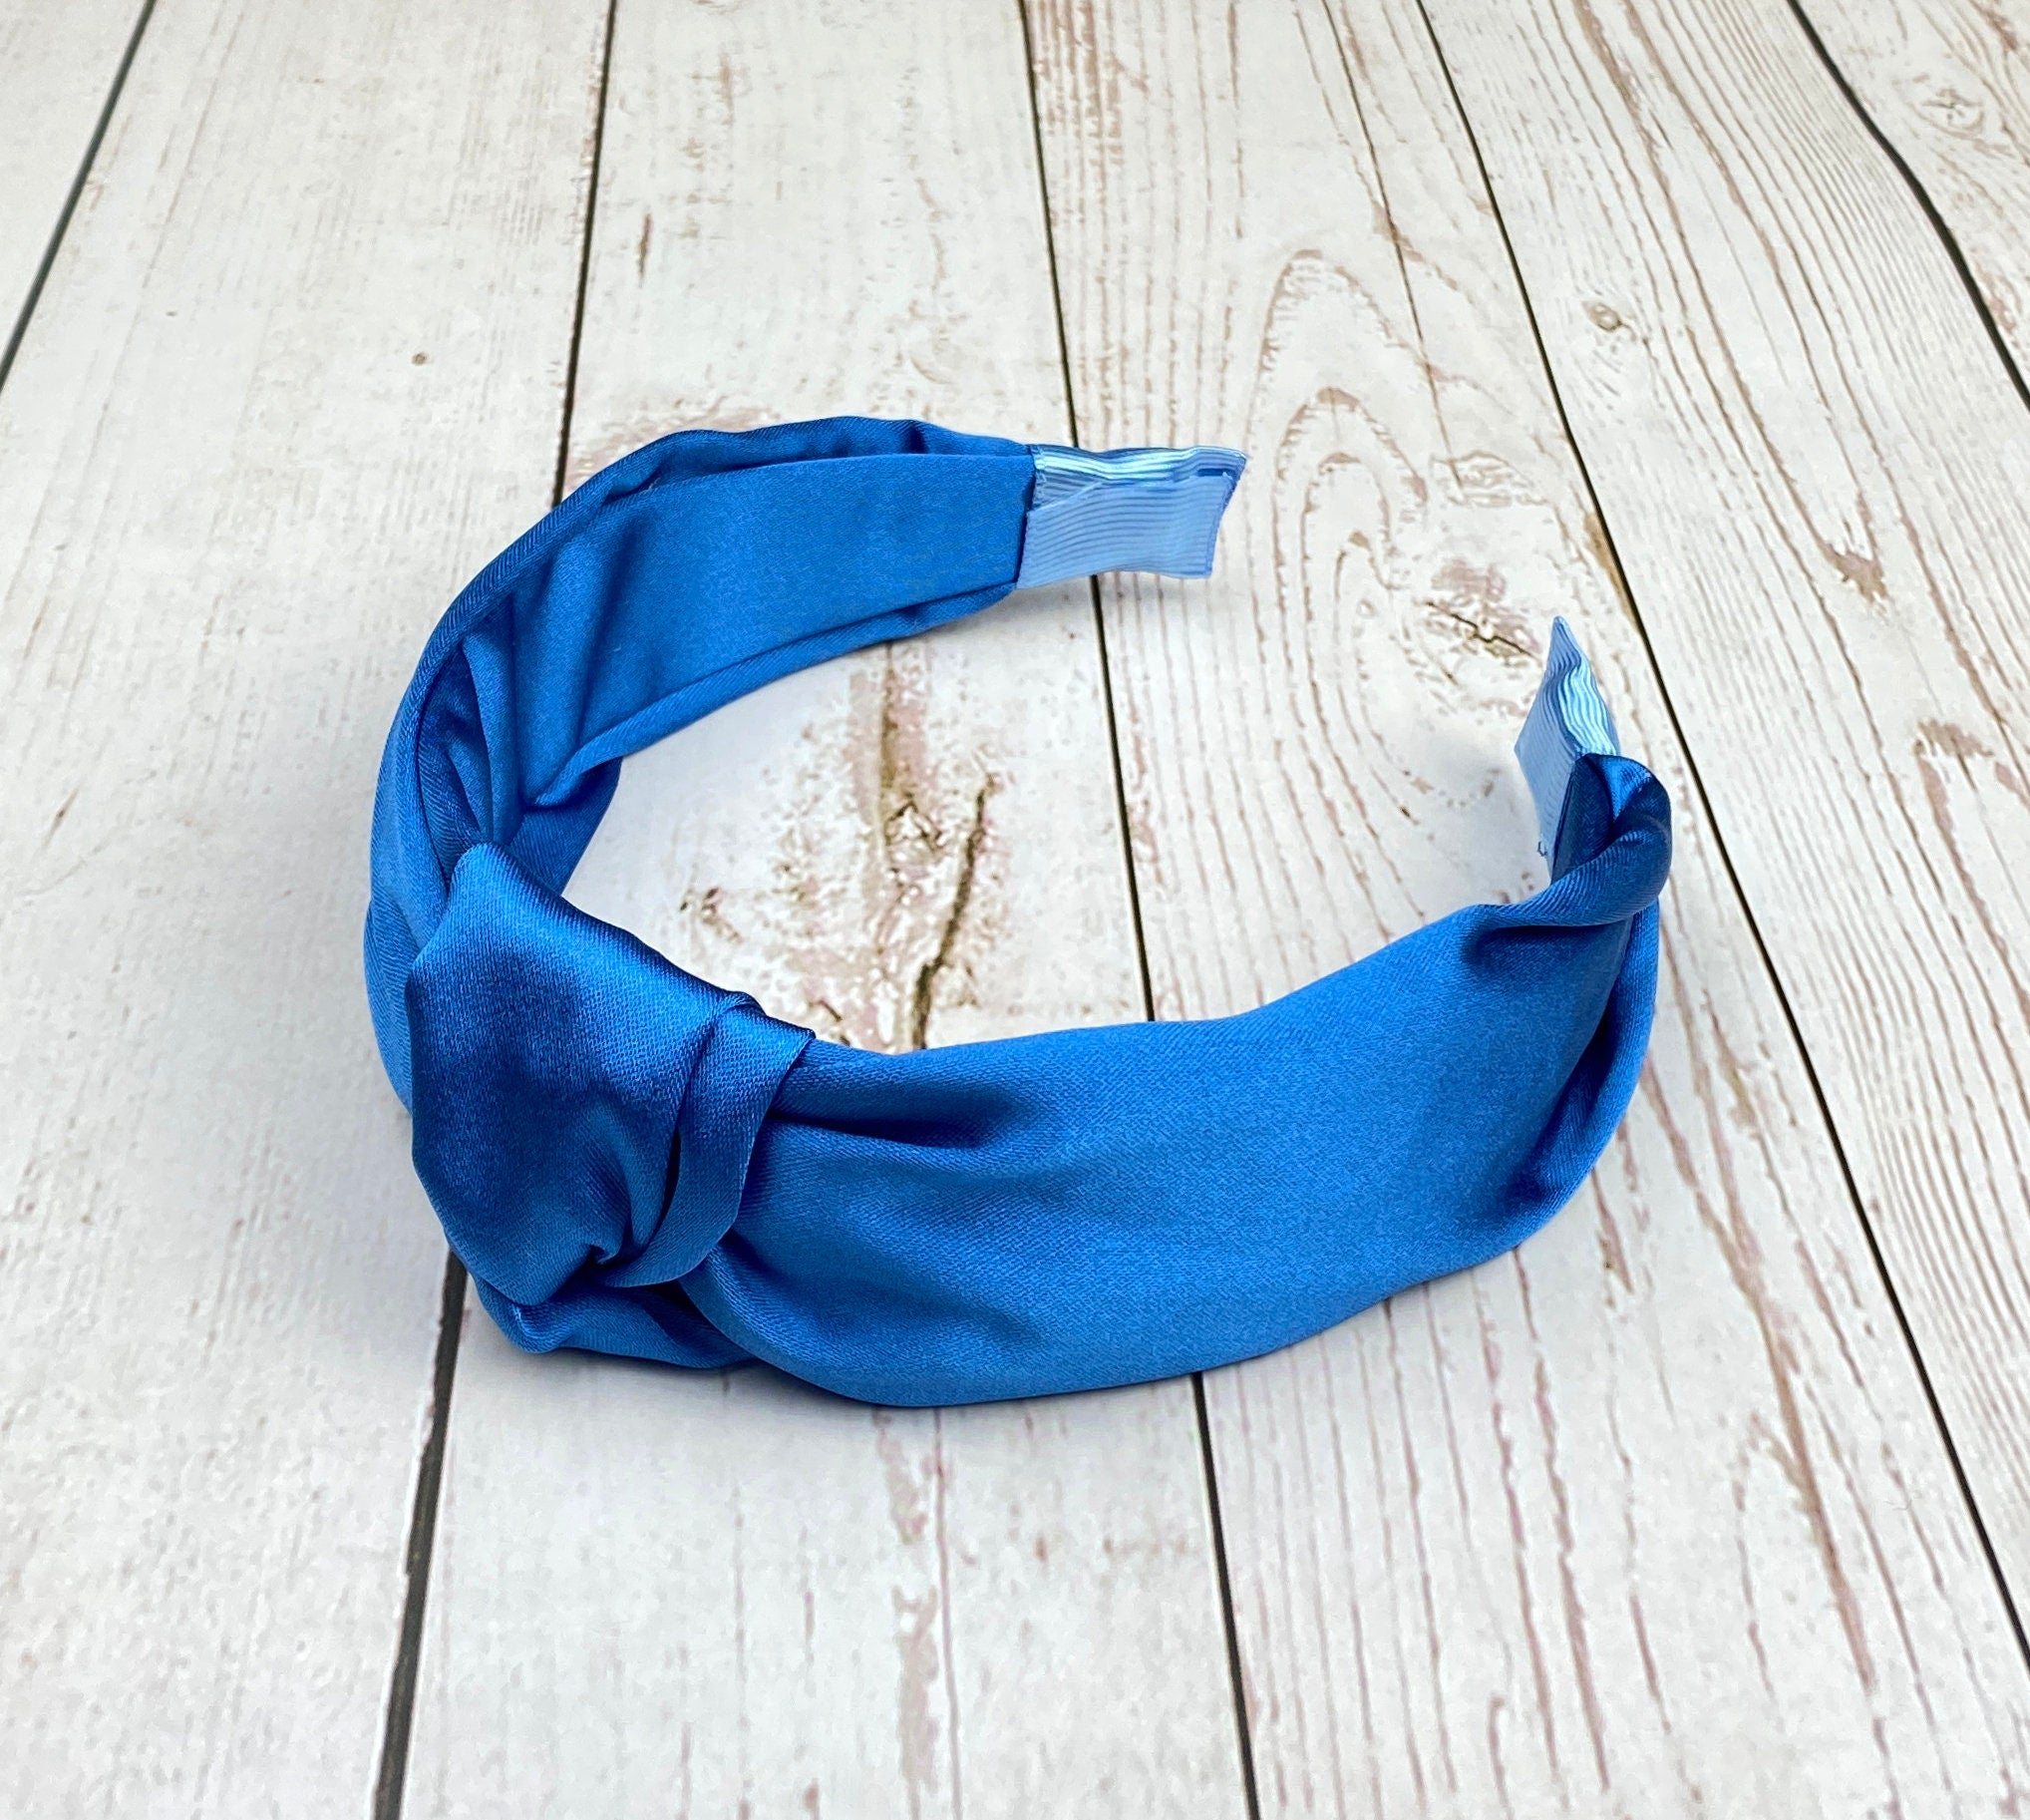 Made from high-quality satin material, this headband is comfortable to wear and won&#39;t cause any irritation or discomfort.